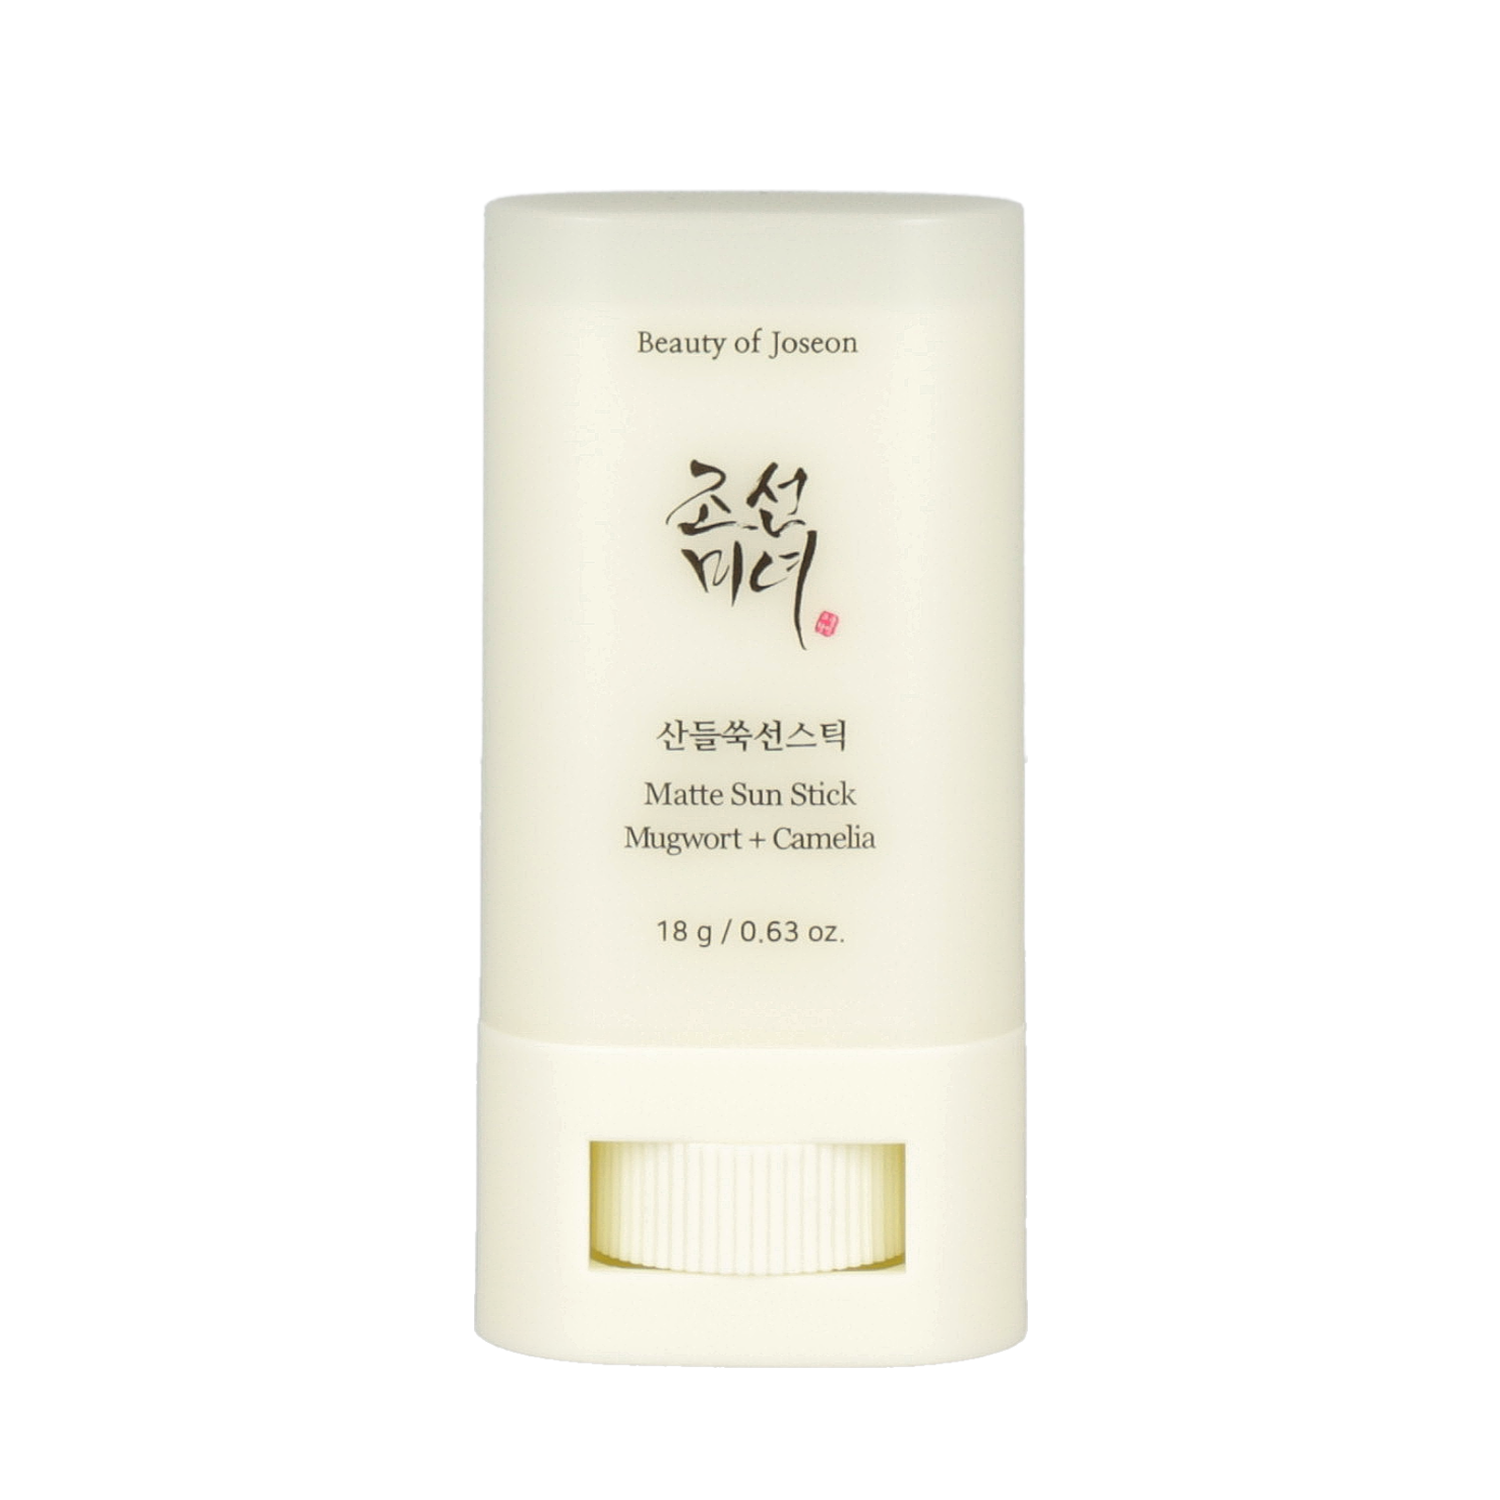 18g Beauty of Joseon Matte Sun Stick with Mugwort and Camelia for sun protection